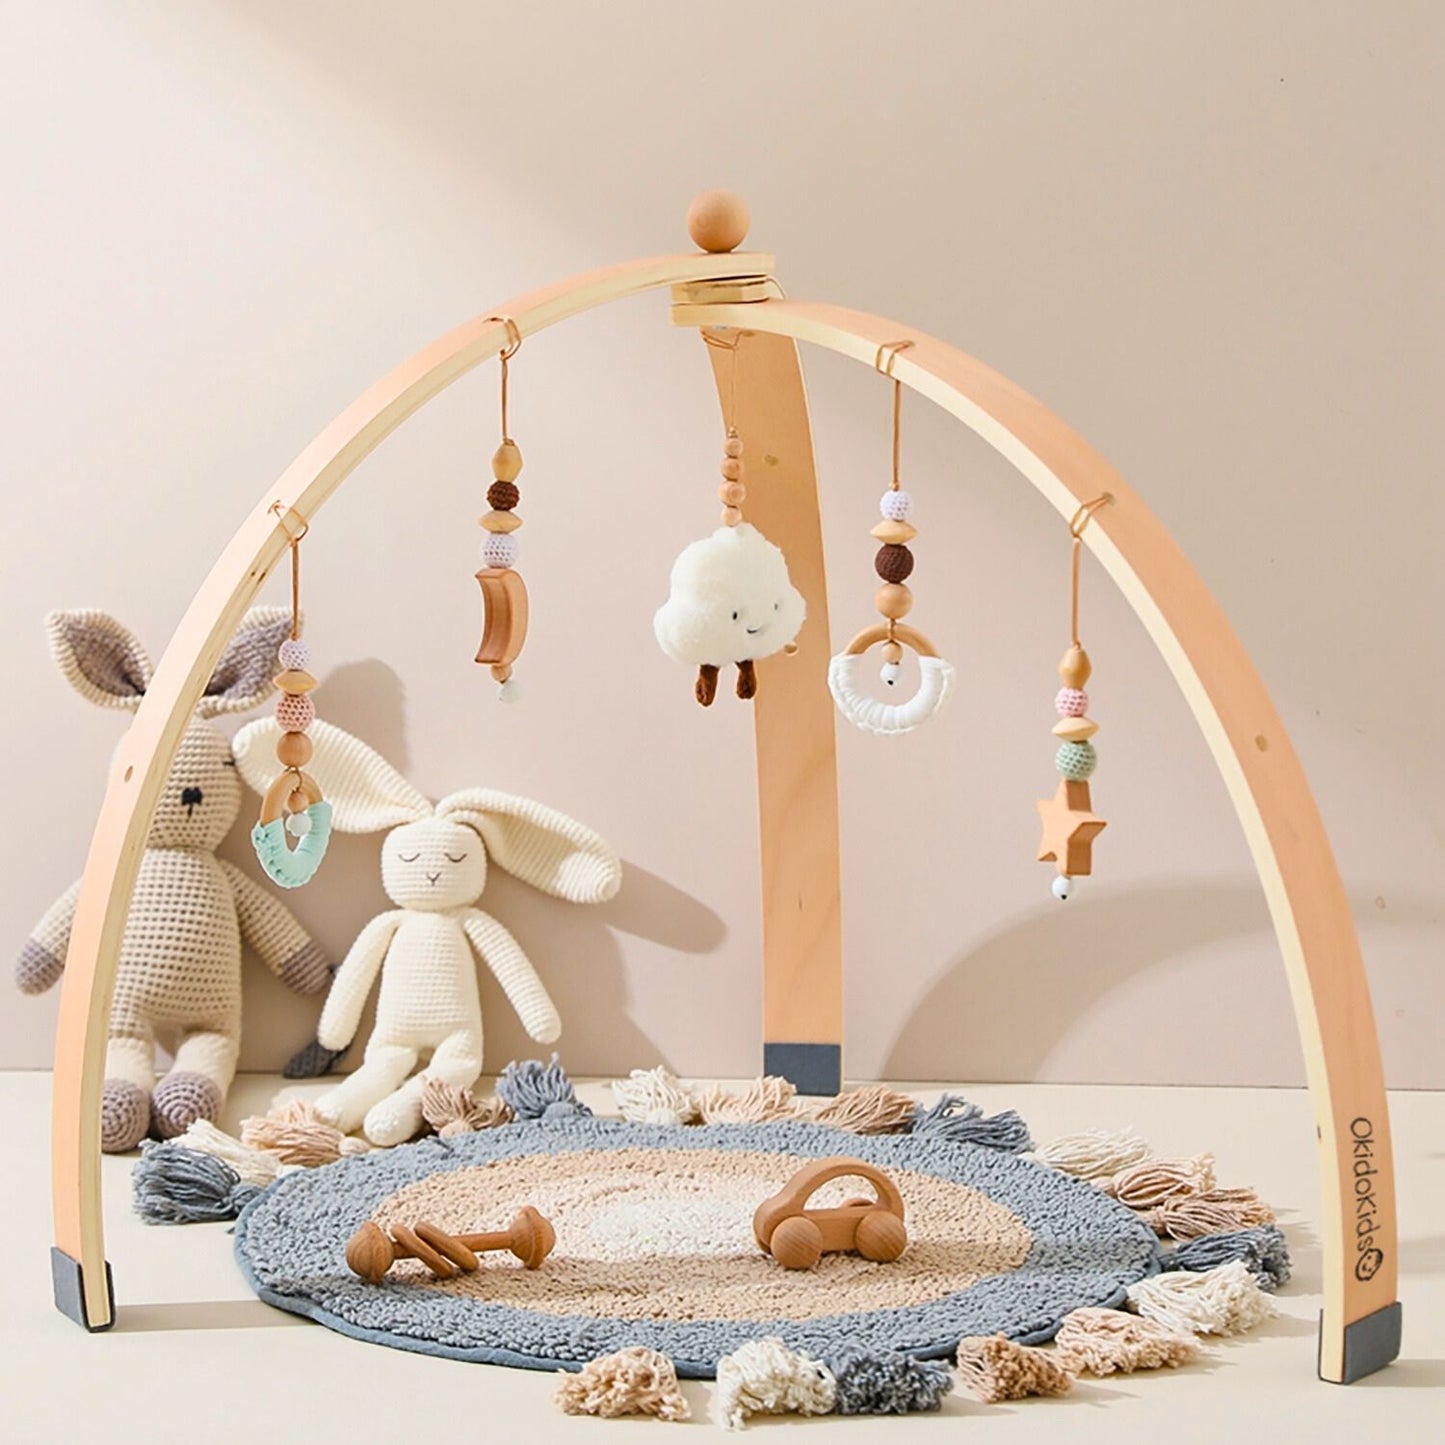 Wooden baby play gym with hanging toys rattles.